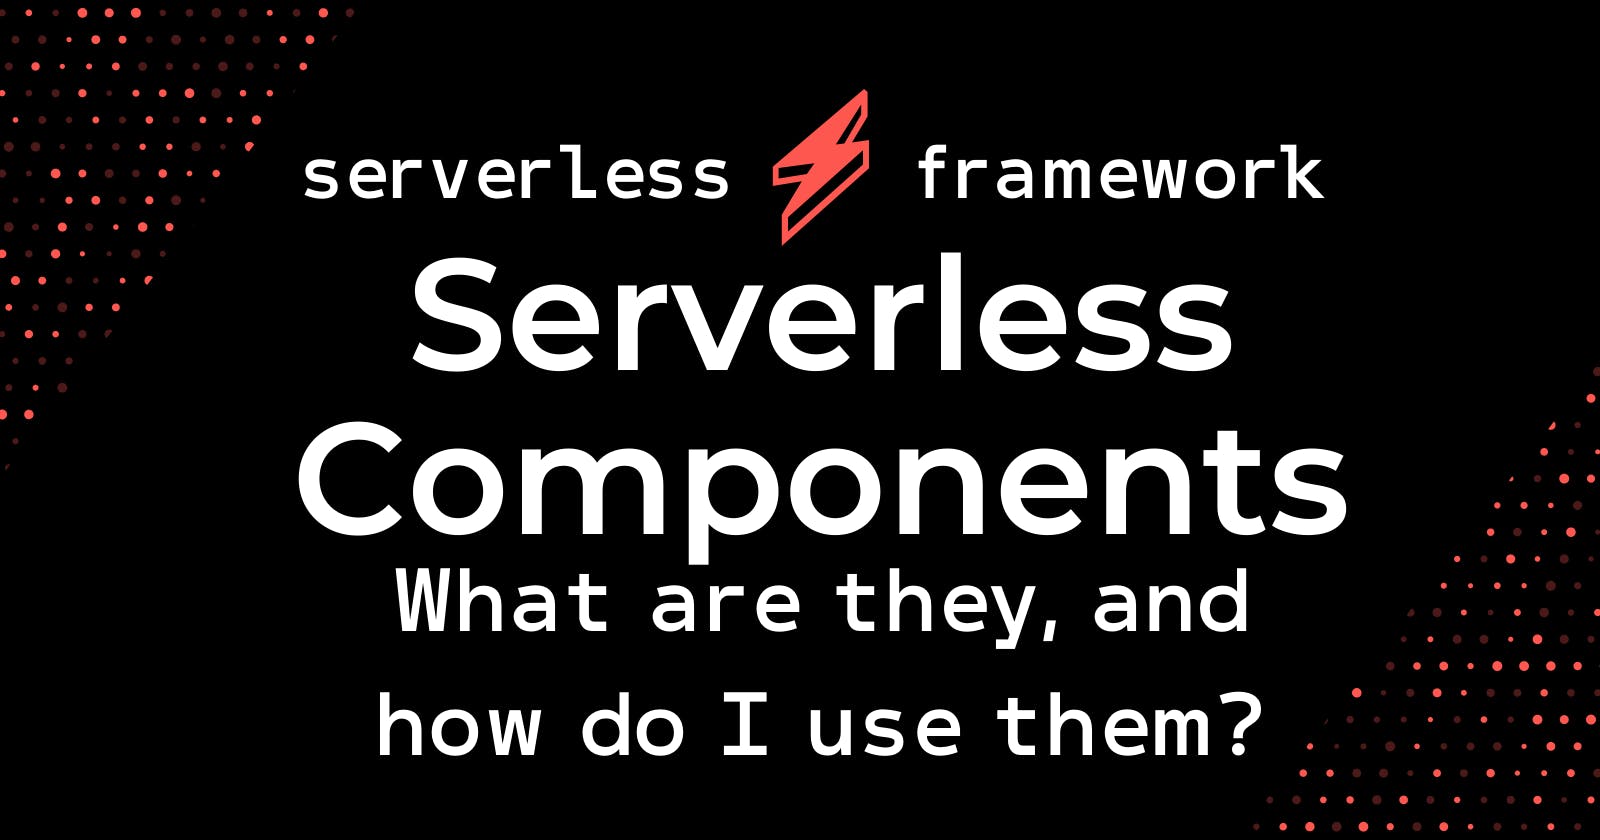 What are Serverless Components, and how do I use them?